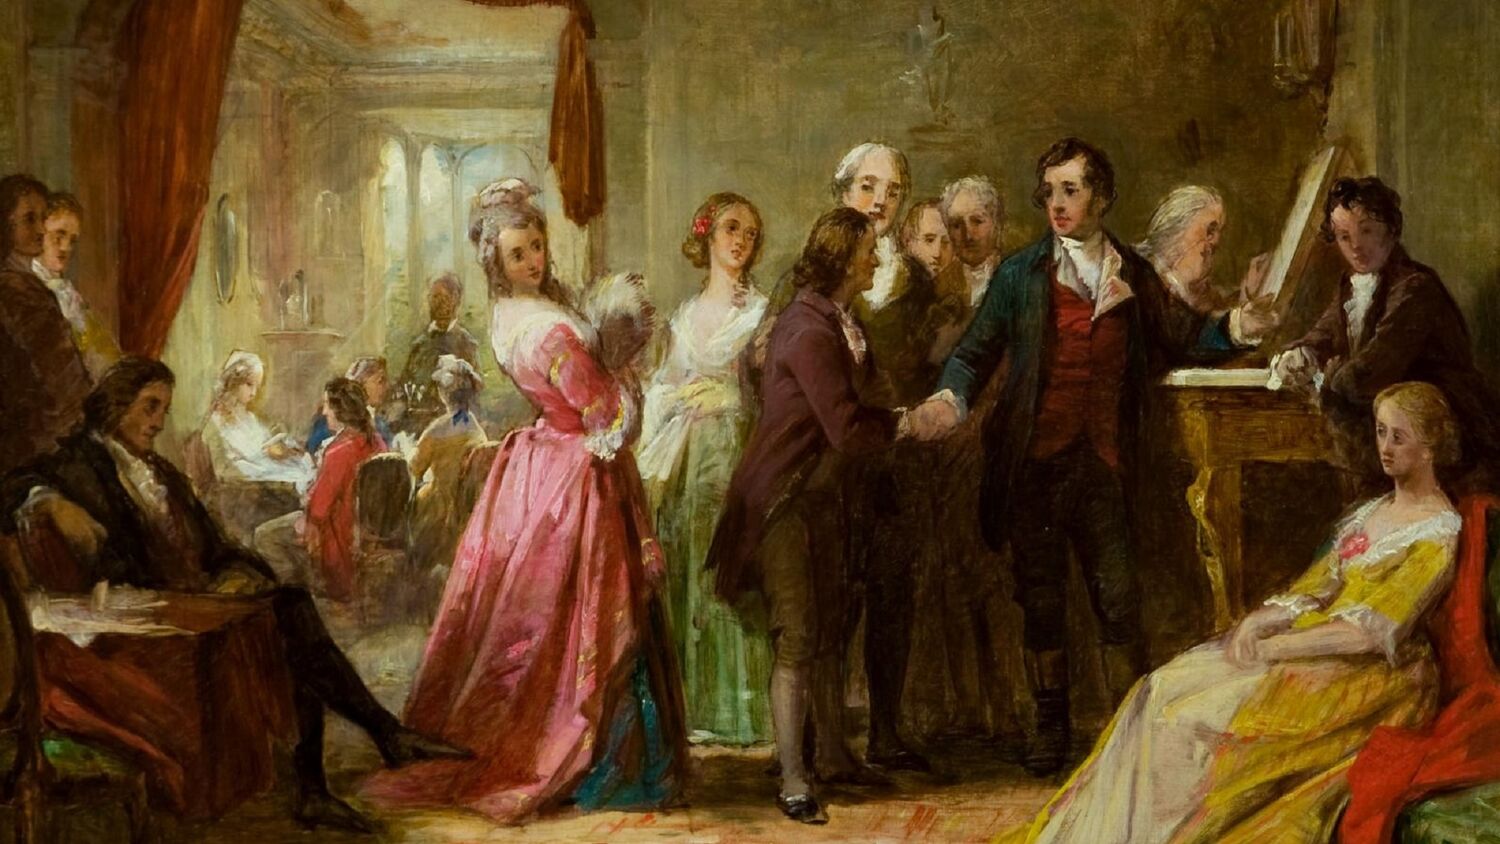 An oil painting of Robert Burns standing in a 'traditional' Georgian drawing room, surrounded by a small audience of well-dressed men and women. In the foreground a young woman sits on a sofa, looking rather bored.